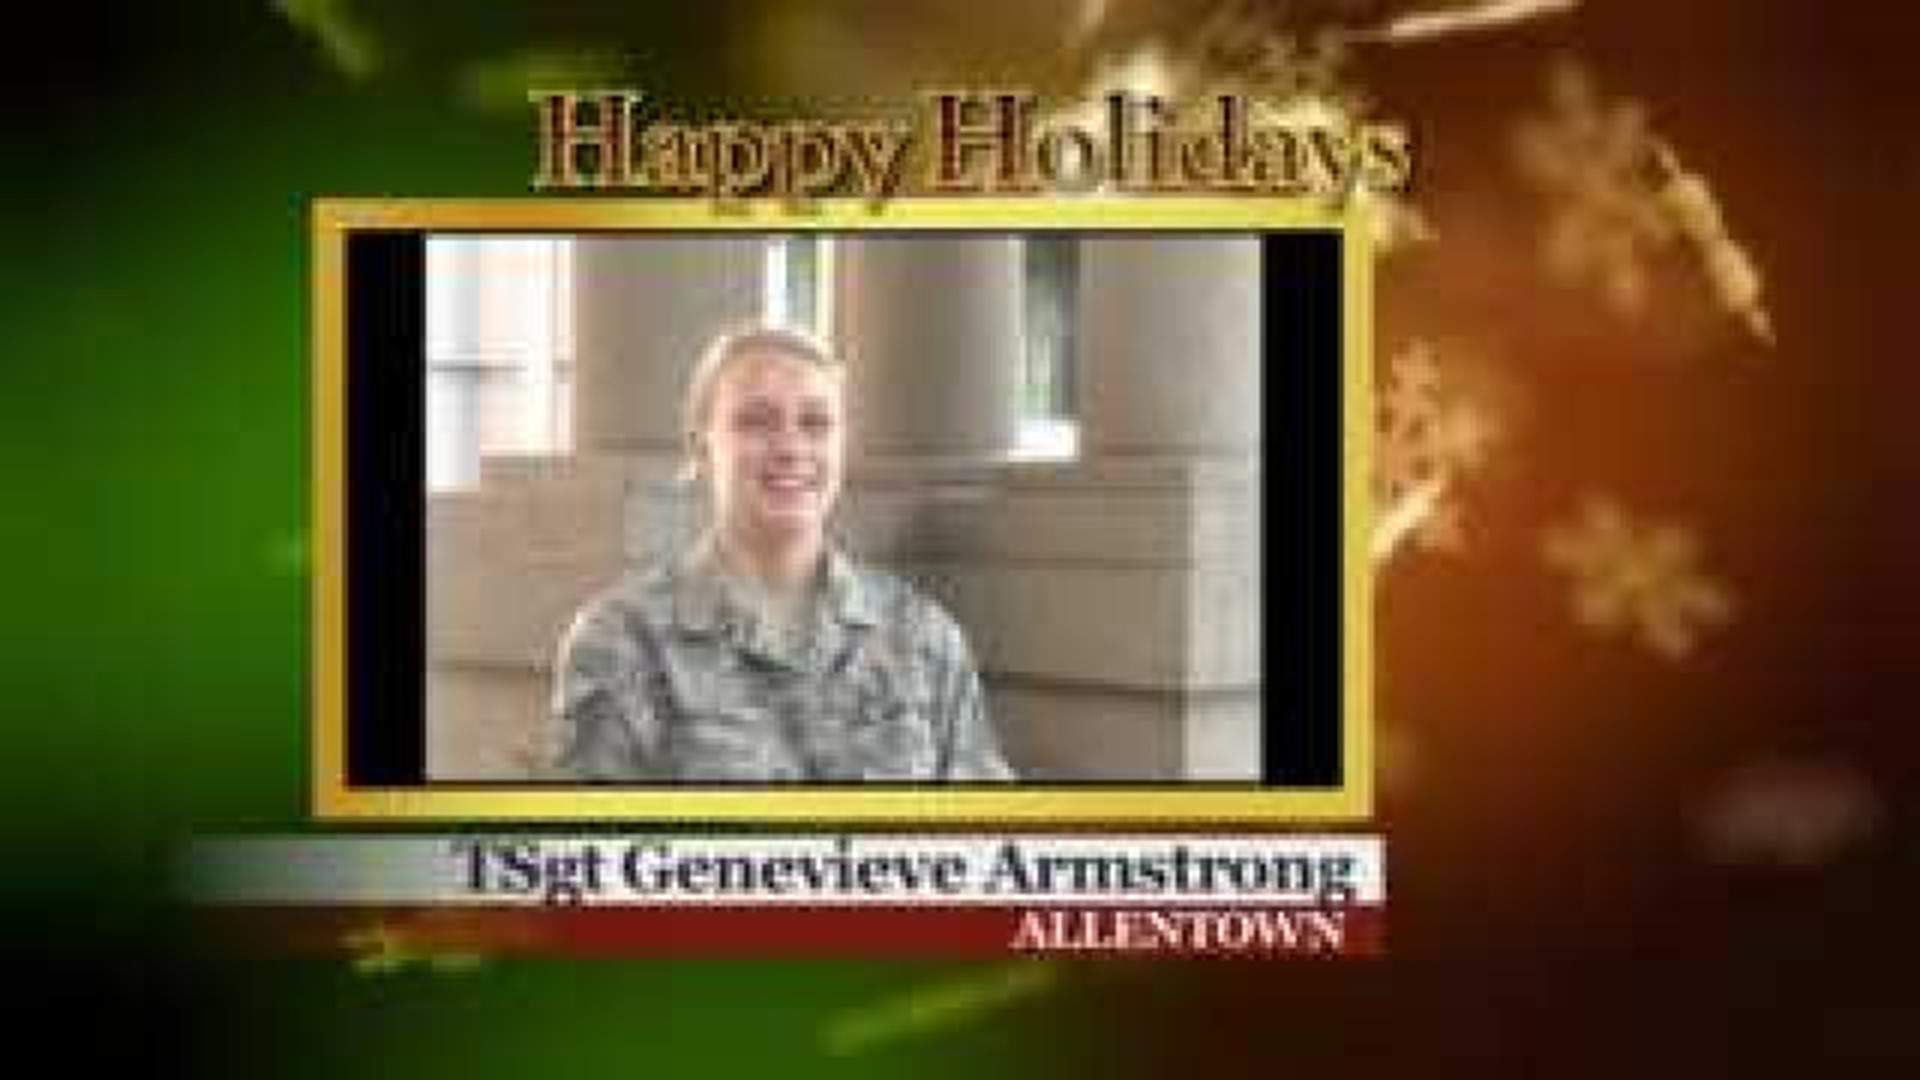 Military Greeting: TSgt Genevieve Armstrong